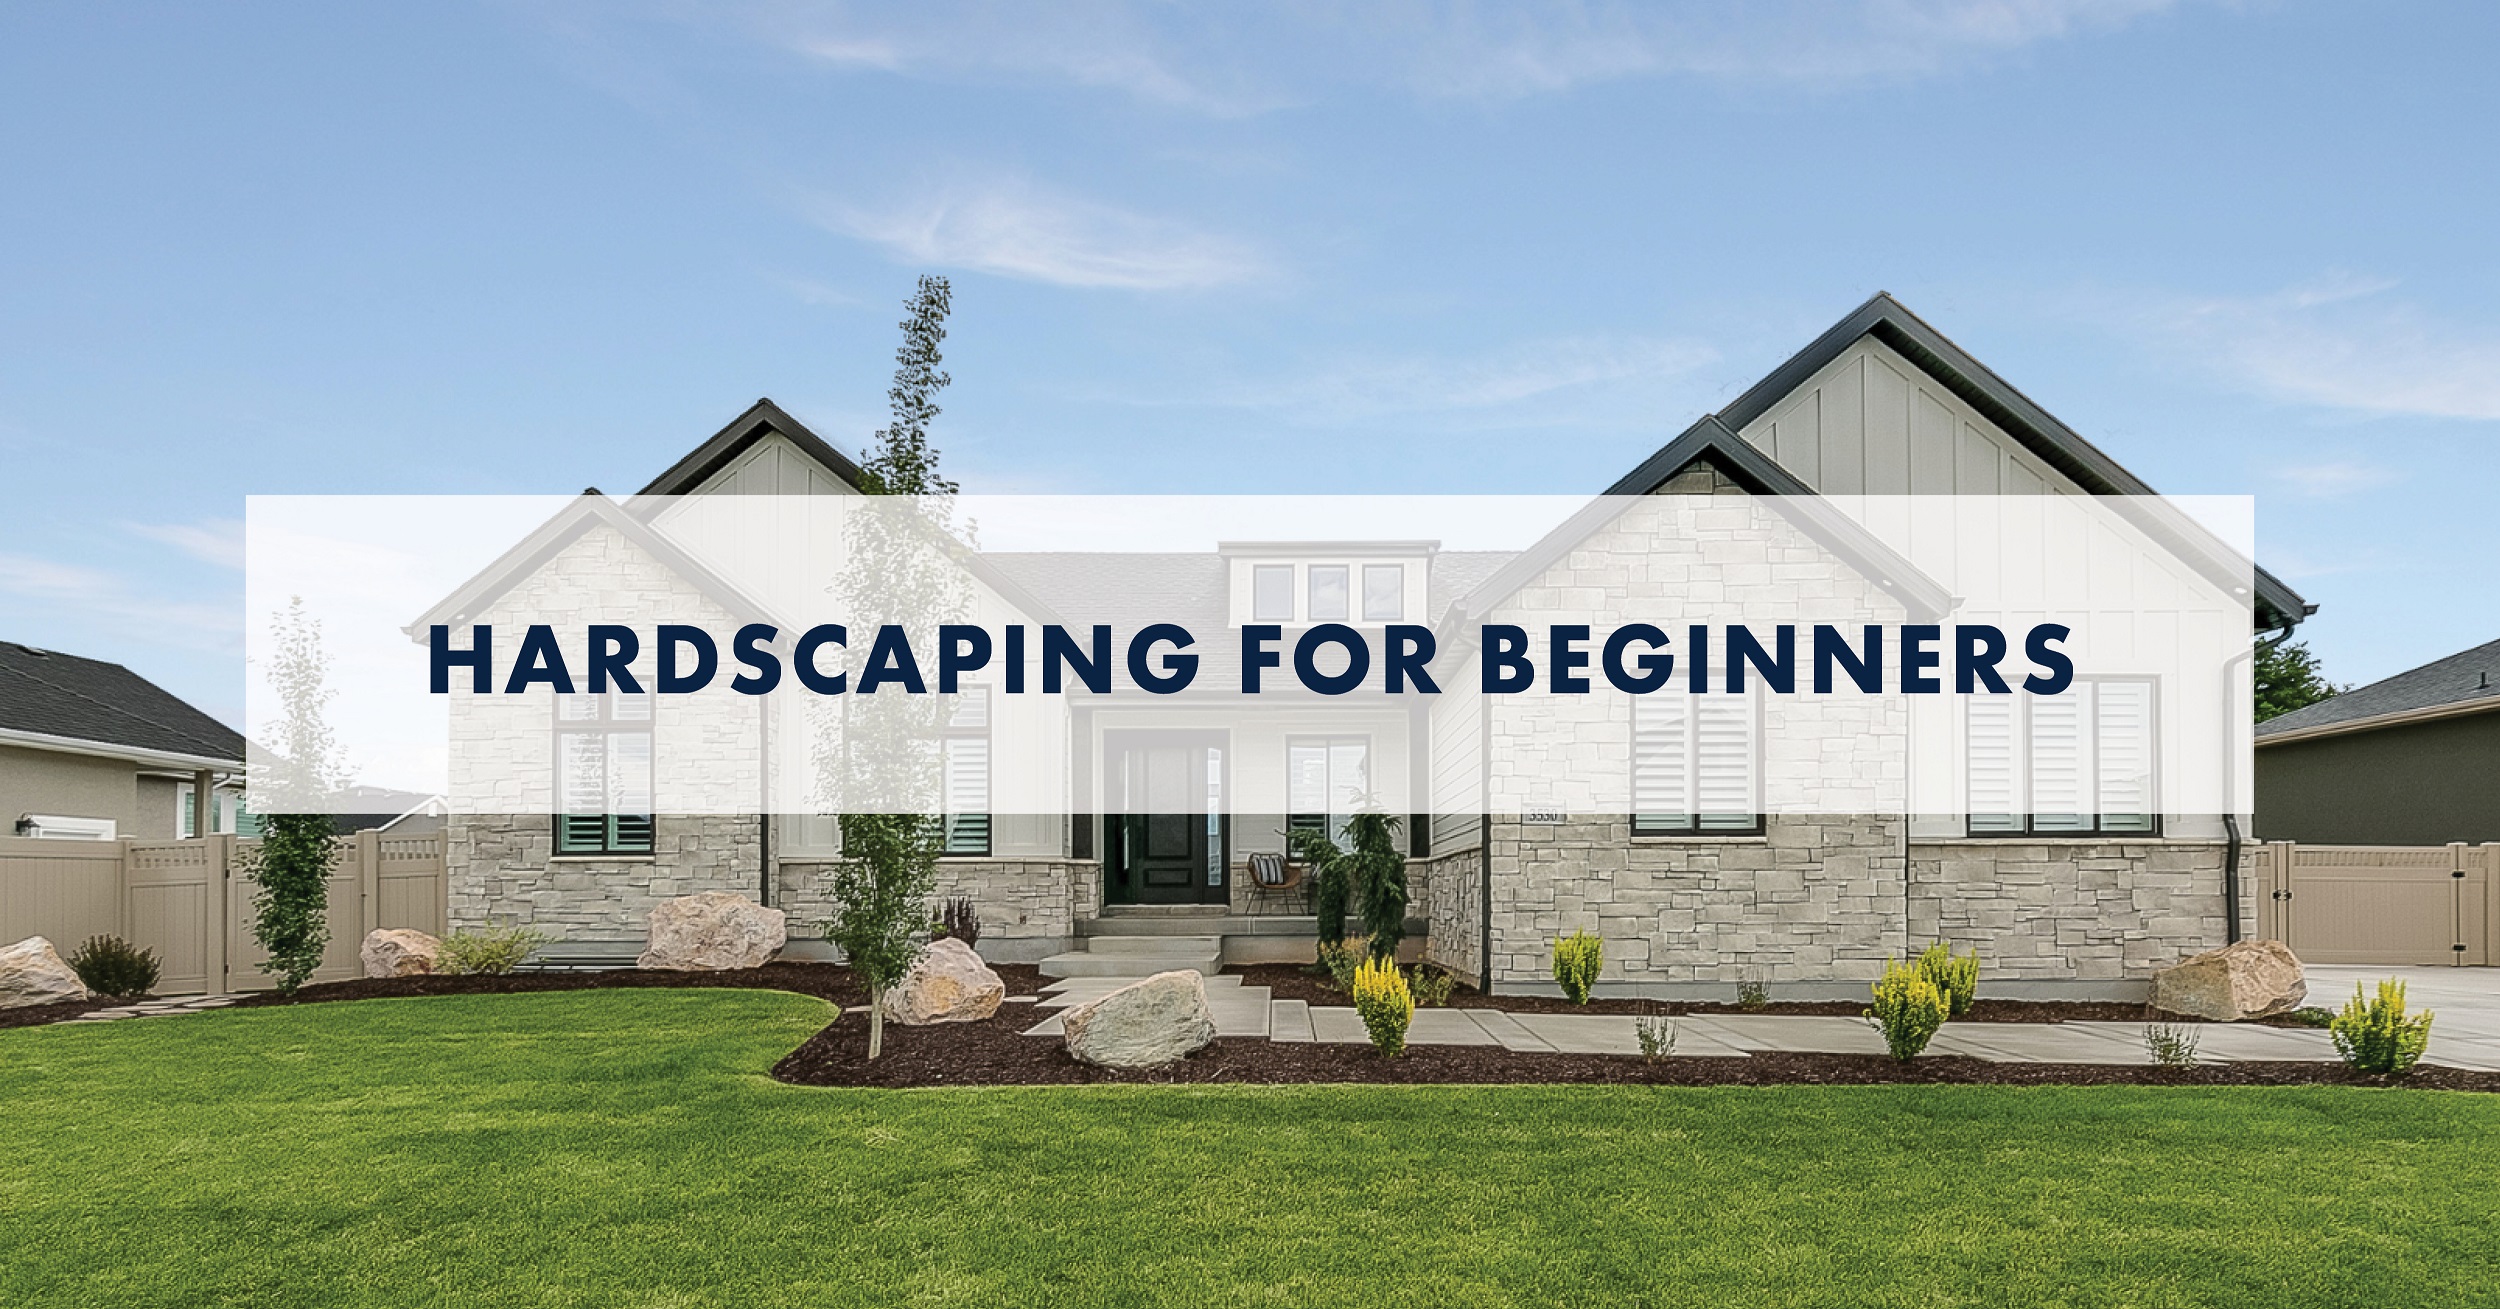 Hardscaping for Beginners